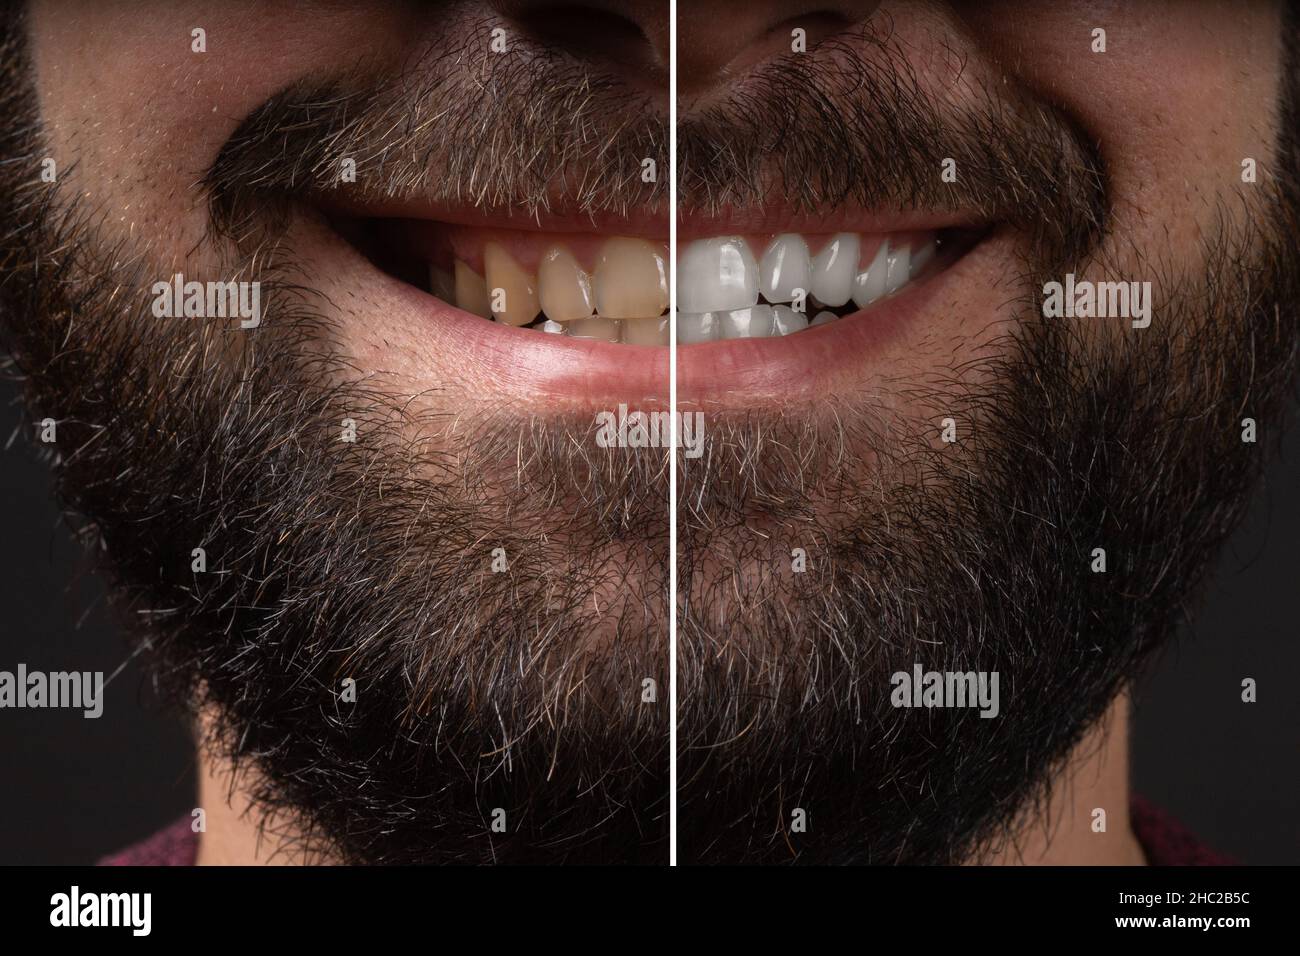 Smiling man before and after teeth whitening procedure, closeup. whitening teeth laser bleach in male man tooth compare before after treatment in Stock Photo